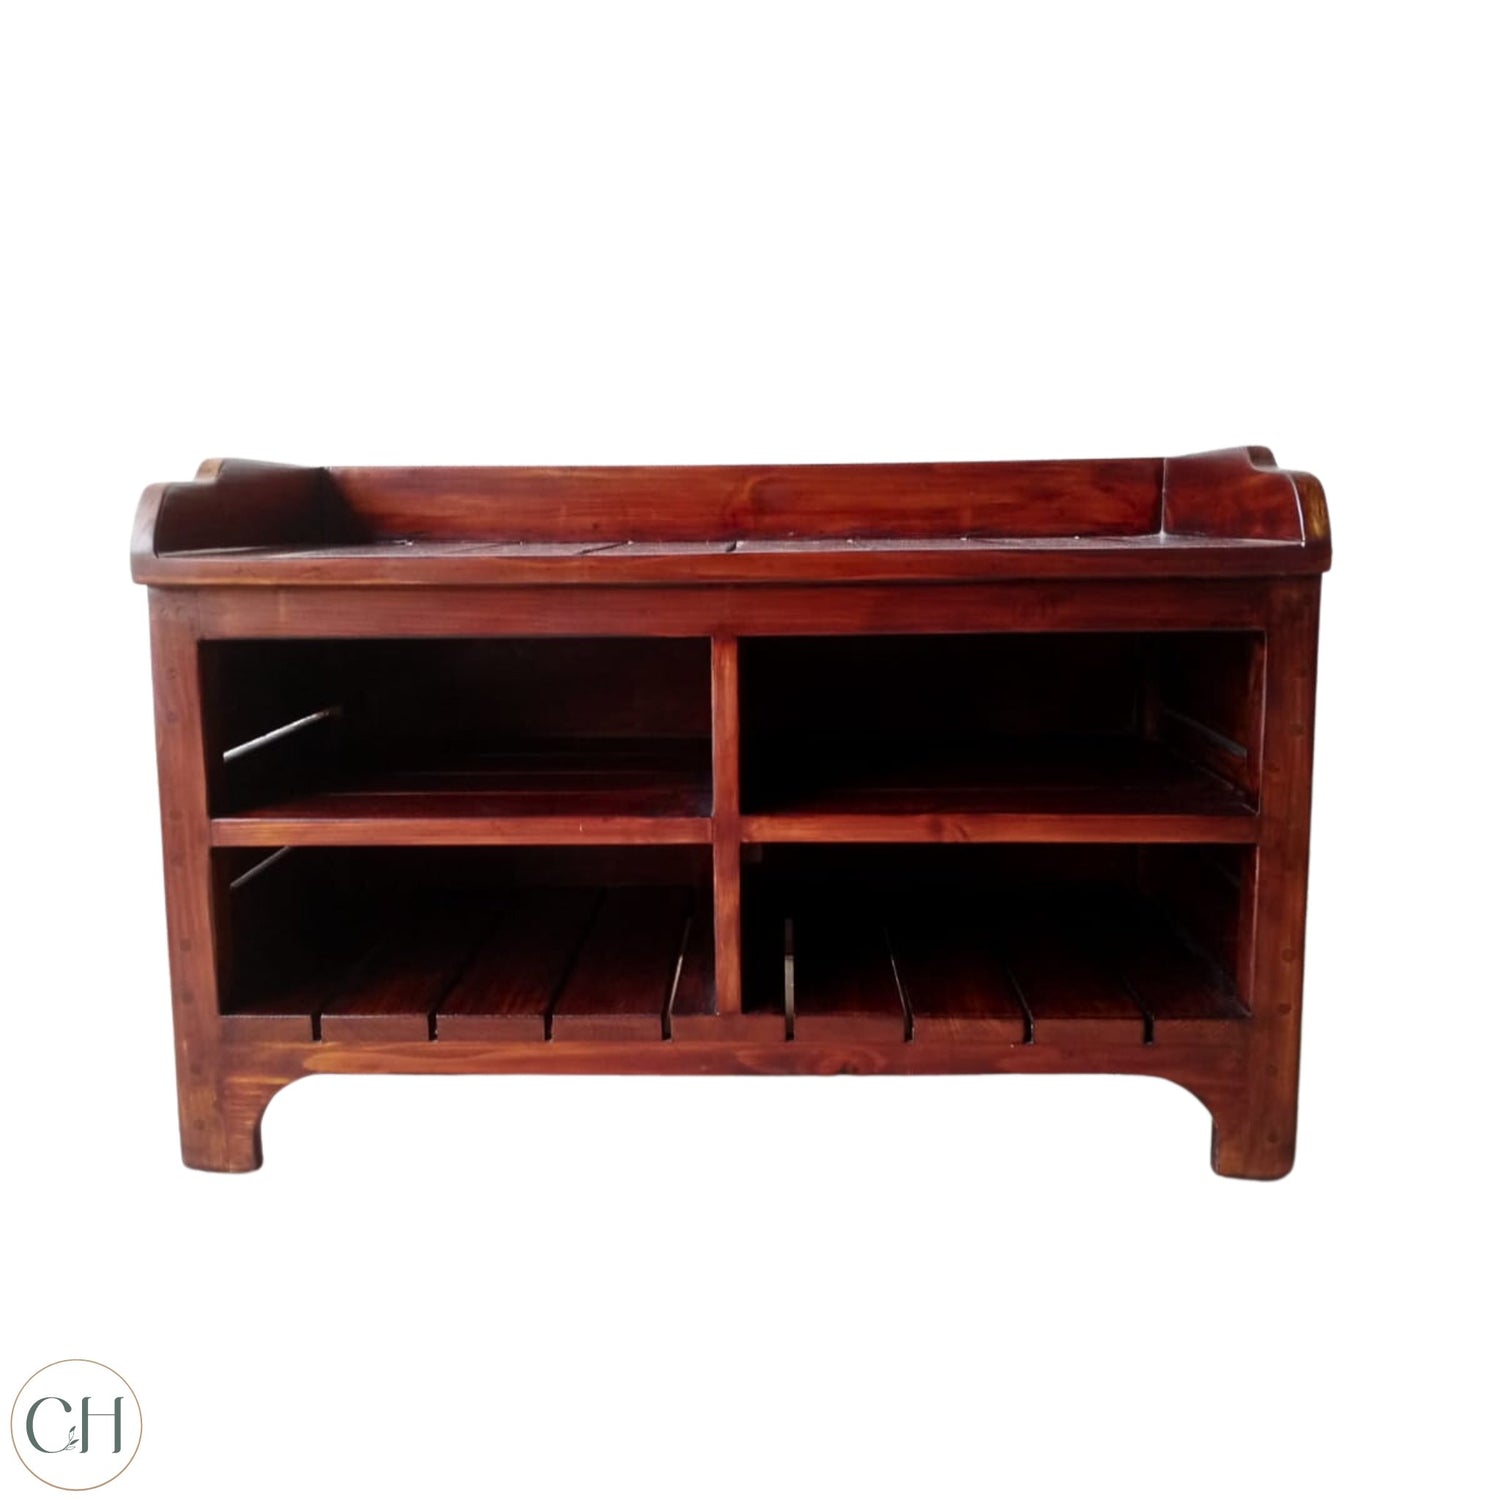 CustHum - Compact wooden open-style shoe cabinet with 4 compartments and seat